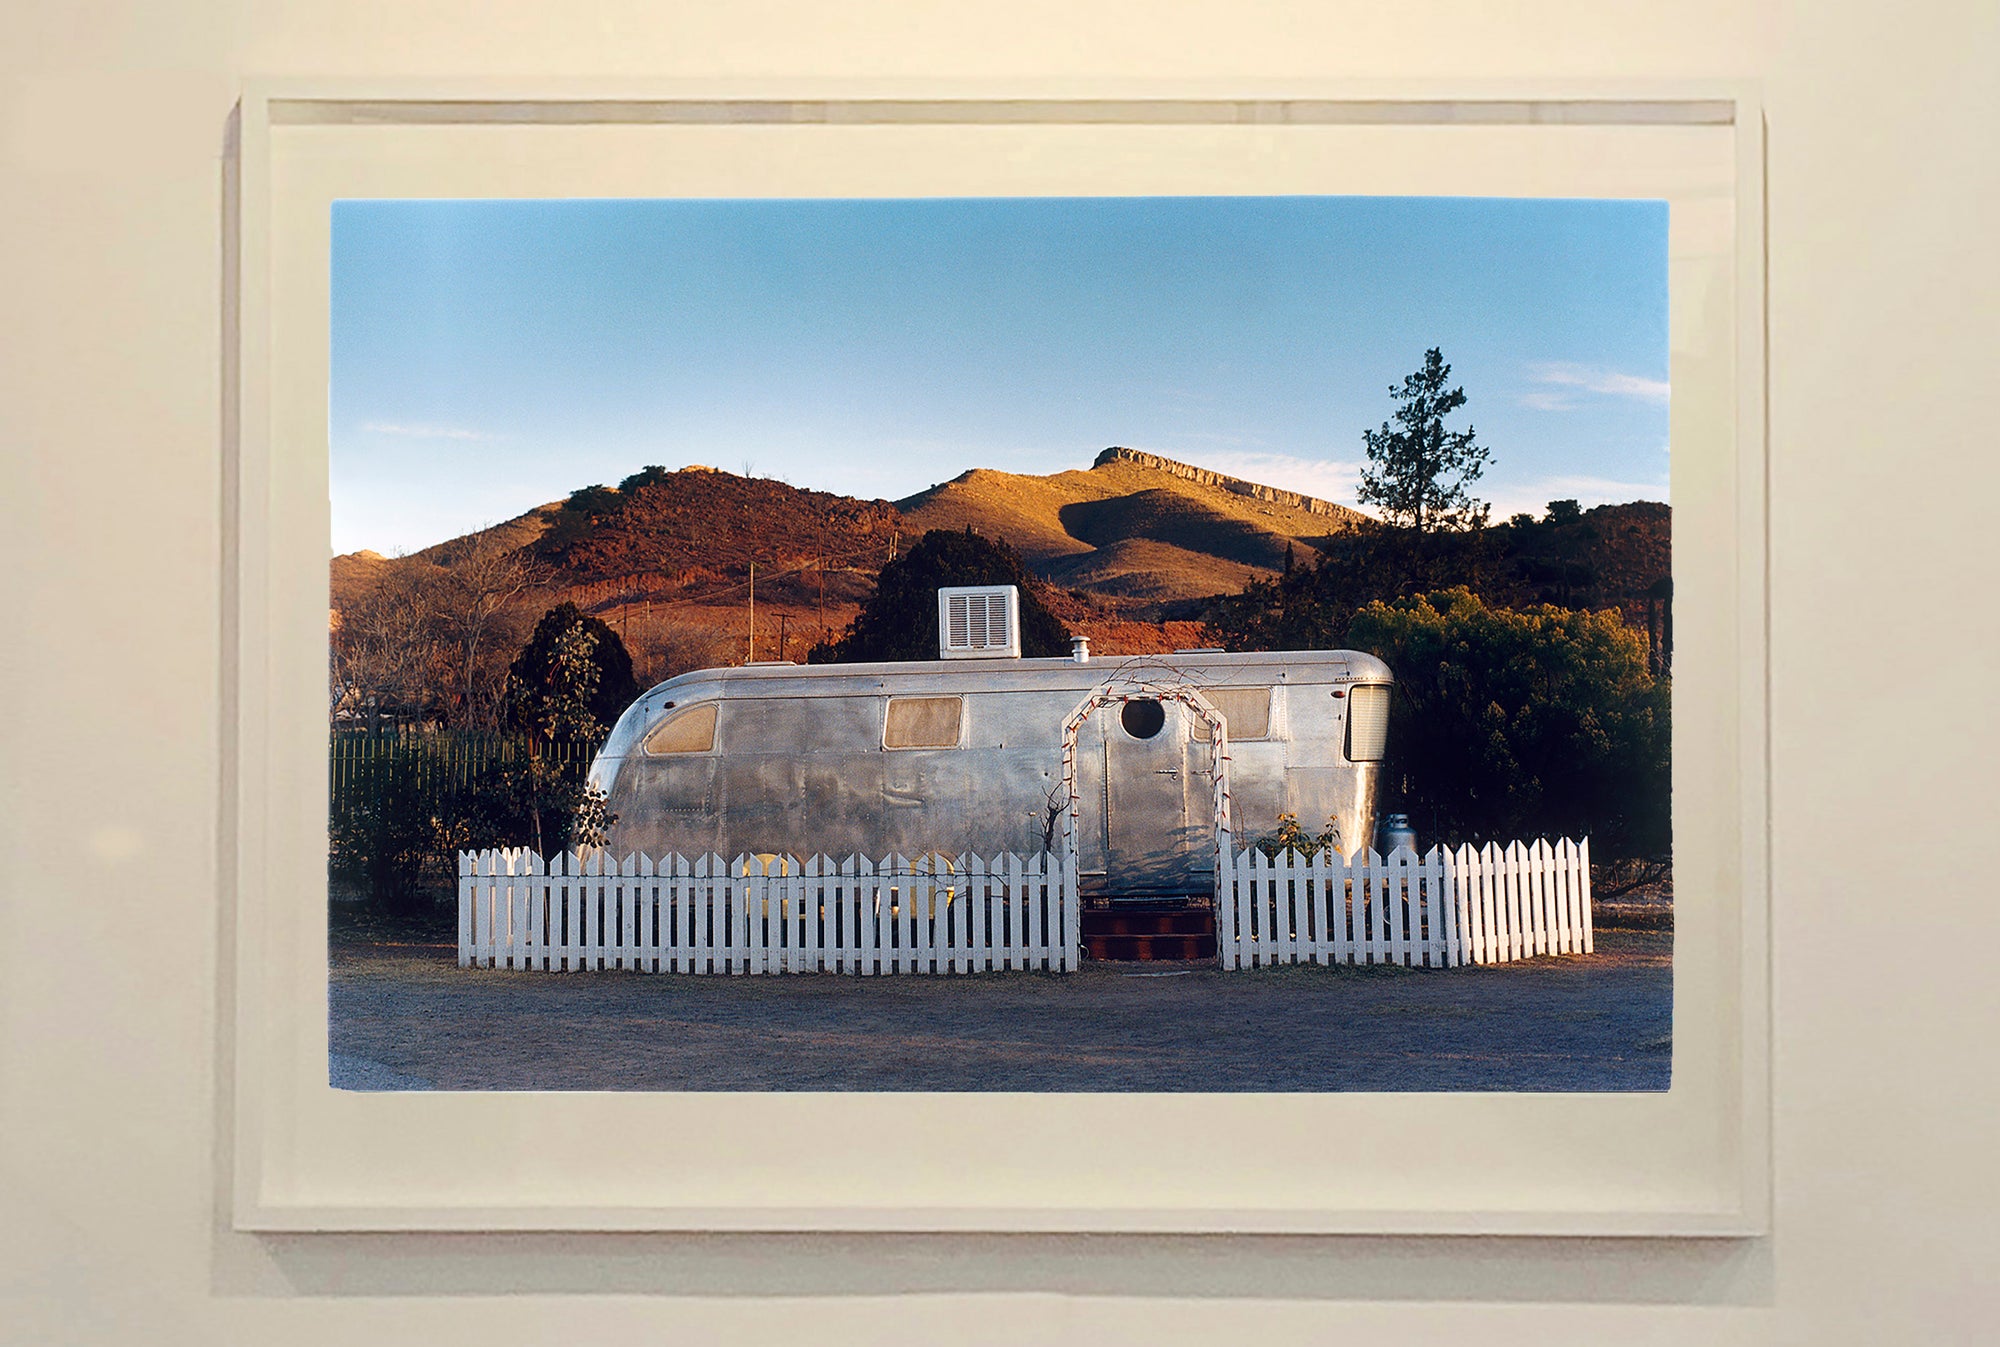 This artwork brings about a romantic dream of living in an RV. Captured in the morning sun at the start of a beautiful Arizona day, this RV is surrounded by both a white picket fence and a beautiful landscape, with the sun tickling the hilltops. Photographed as part of Richard Heeps' 'Dream in Colour' series.